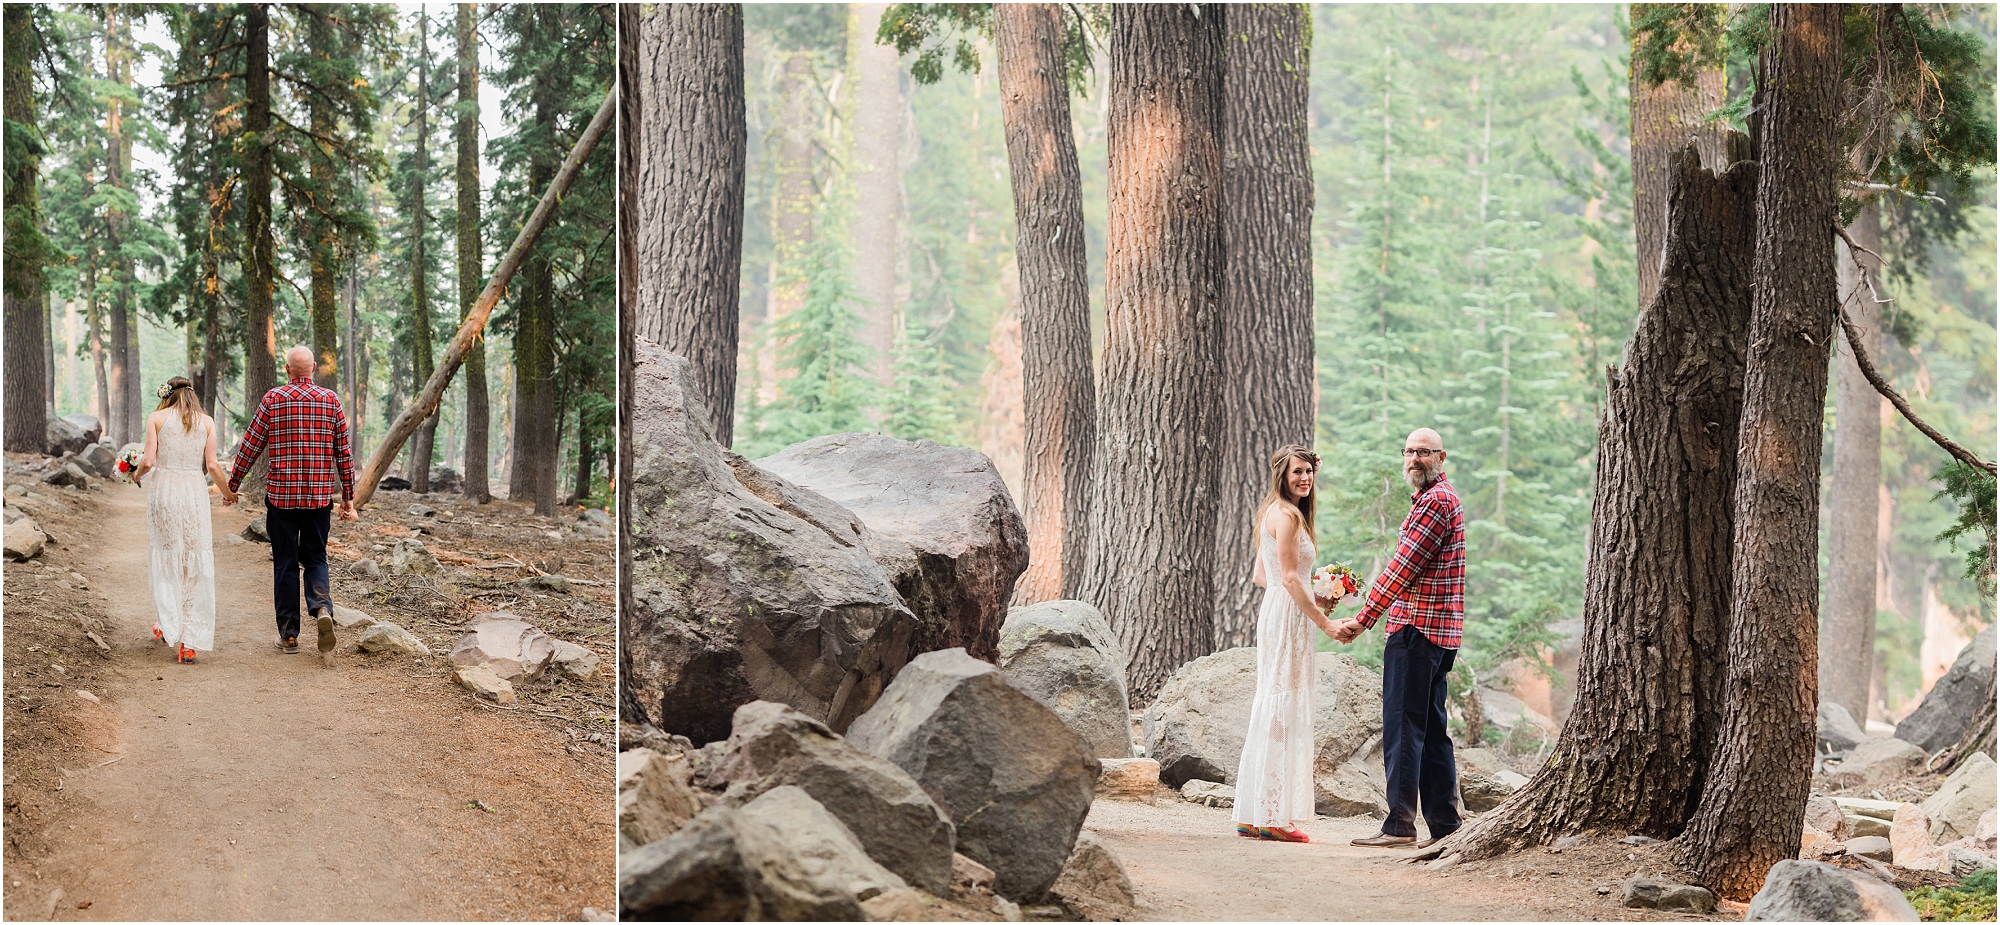 A bride and groom hike through the forest on their way to Plaikni Falls for their Crater Lake Elopement in Oregon. | Erica Swantek Photography